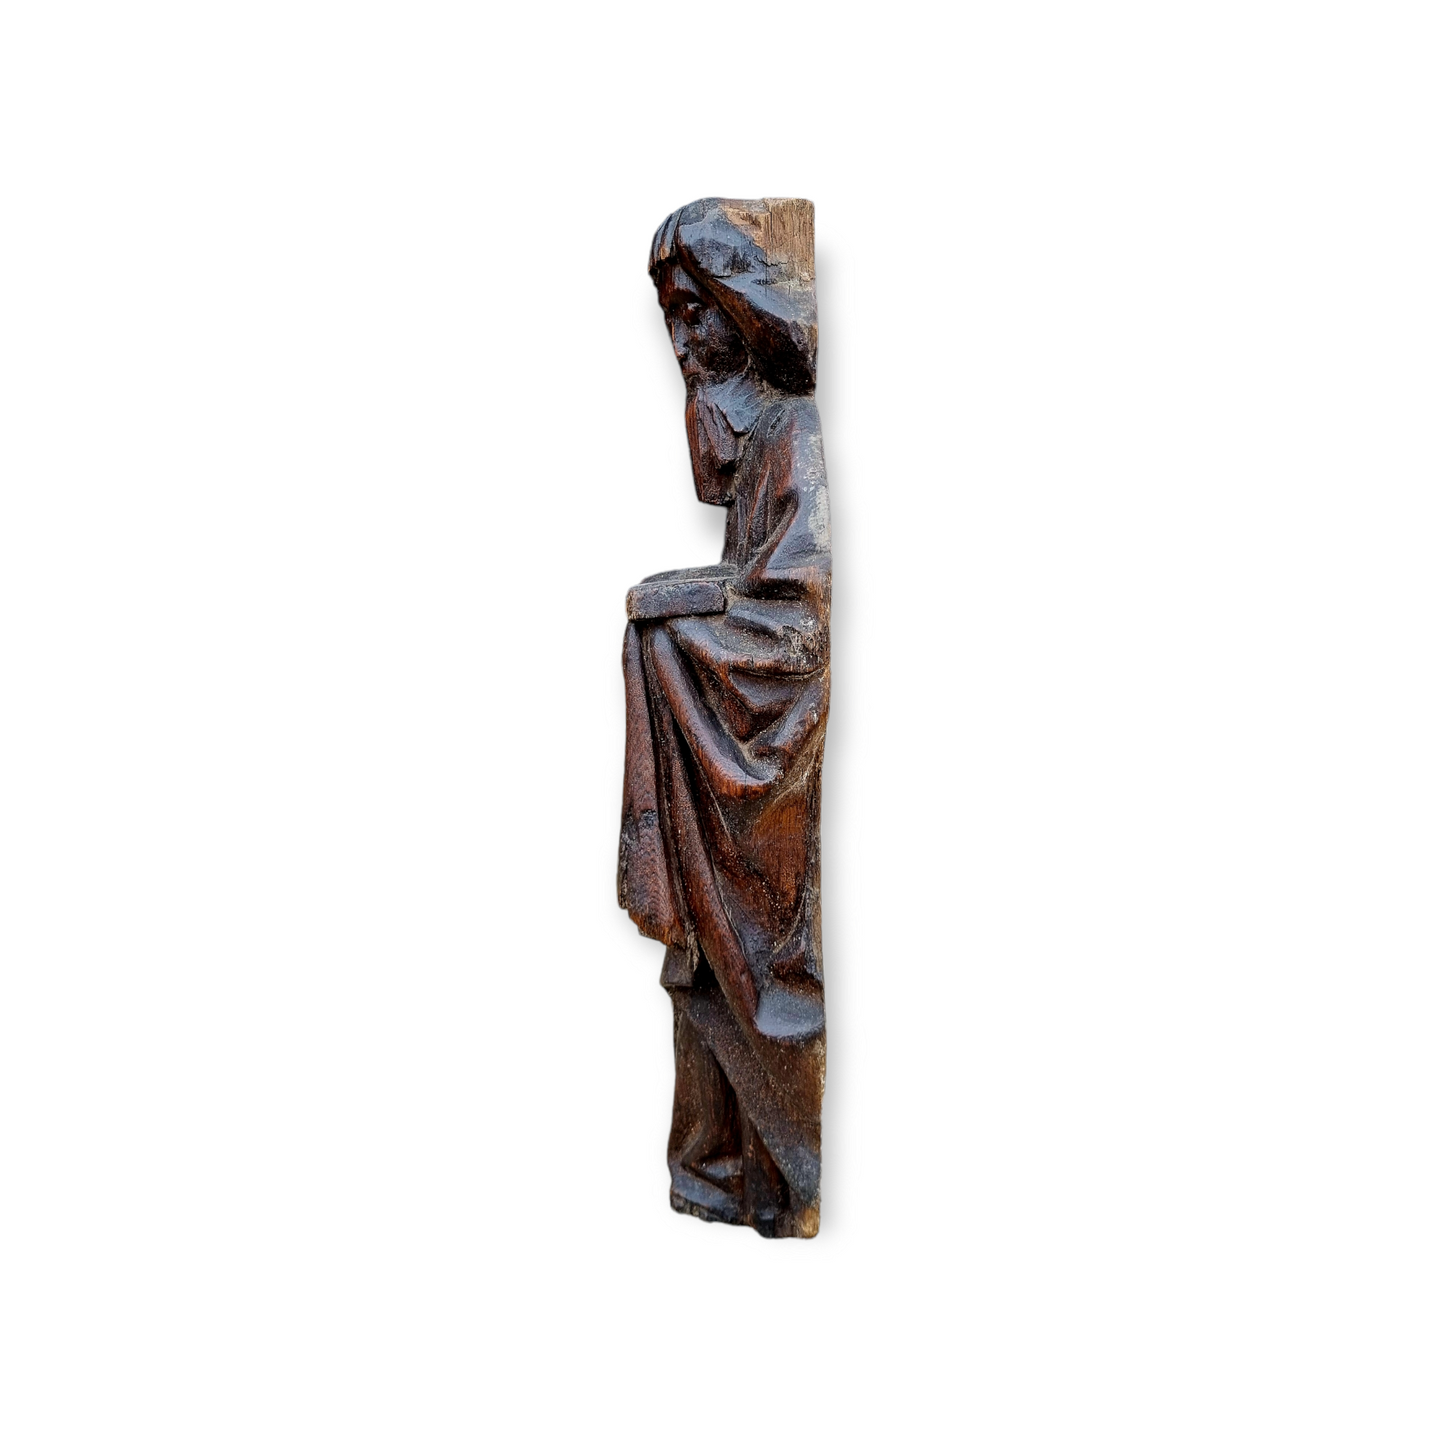 15th Century English Antique Carved Oak Figure of a Saint, Possibly Saint Paul, Attributed to East Anglia